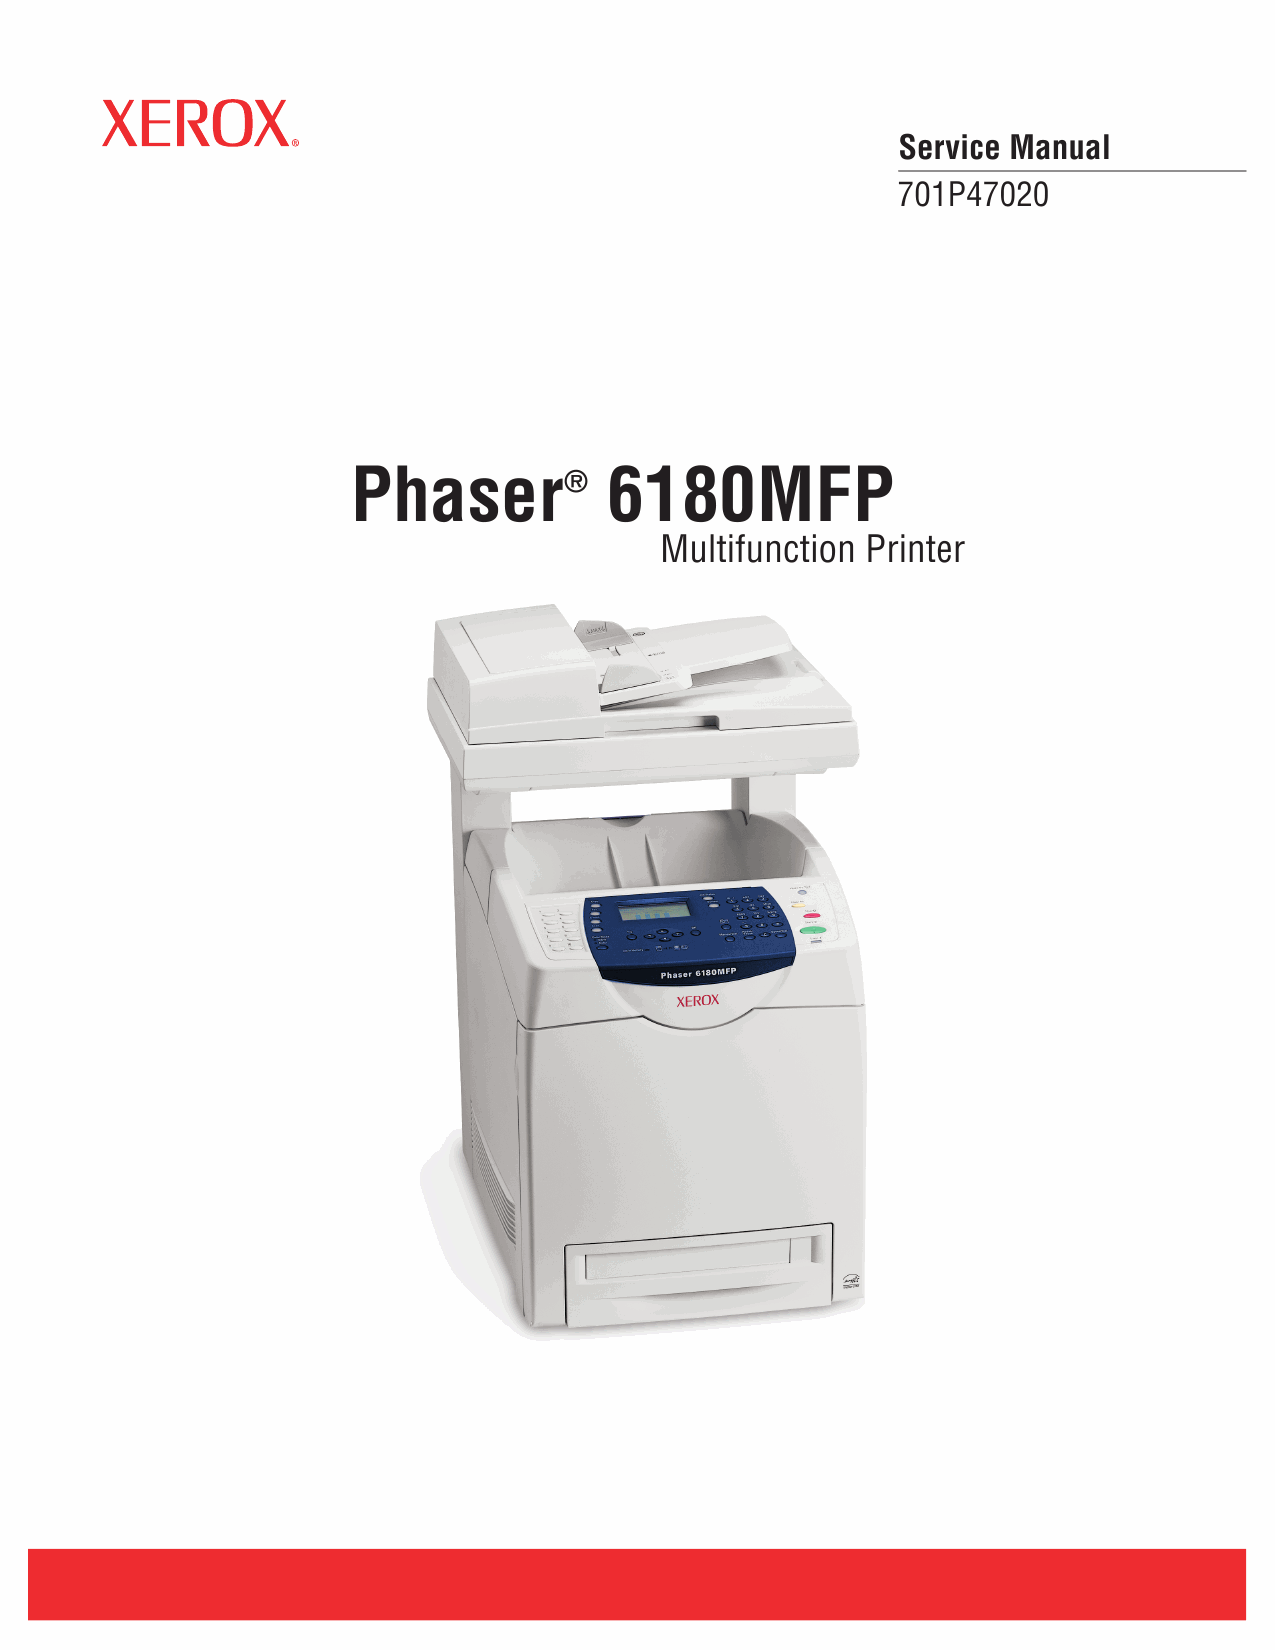 Xerox Phaser 6180-MFP Parts List and Service Manual-1